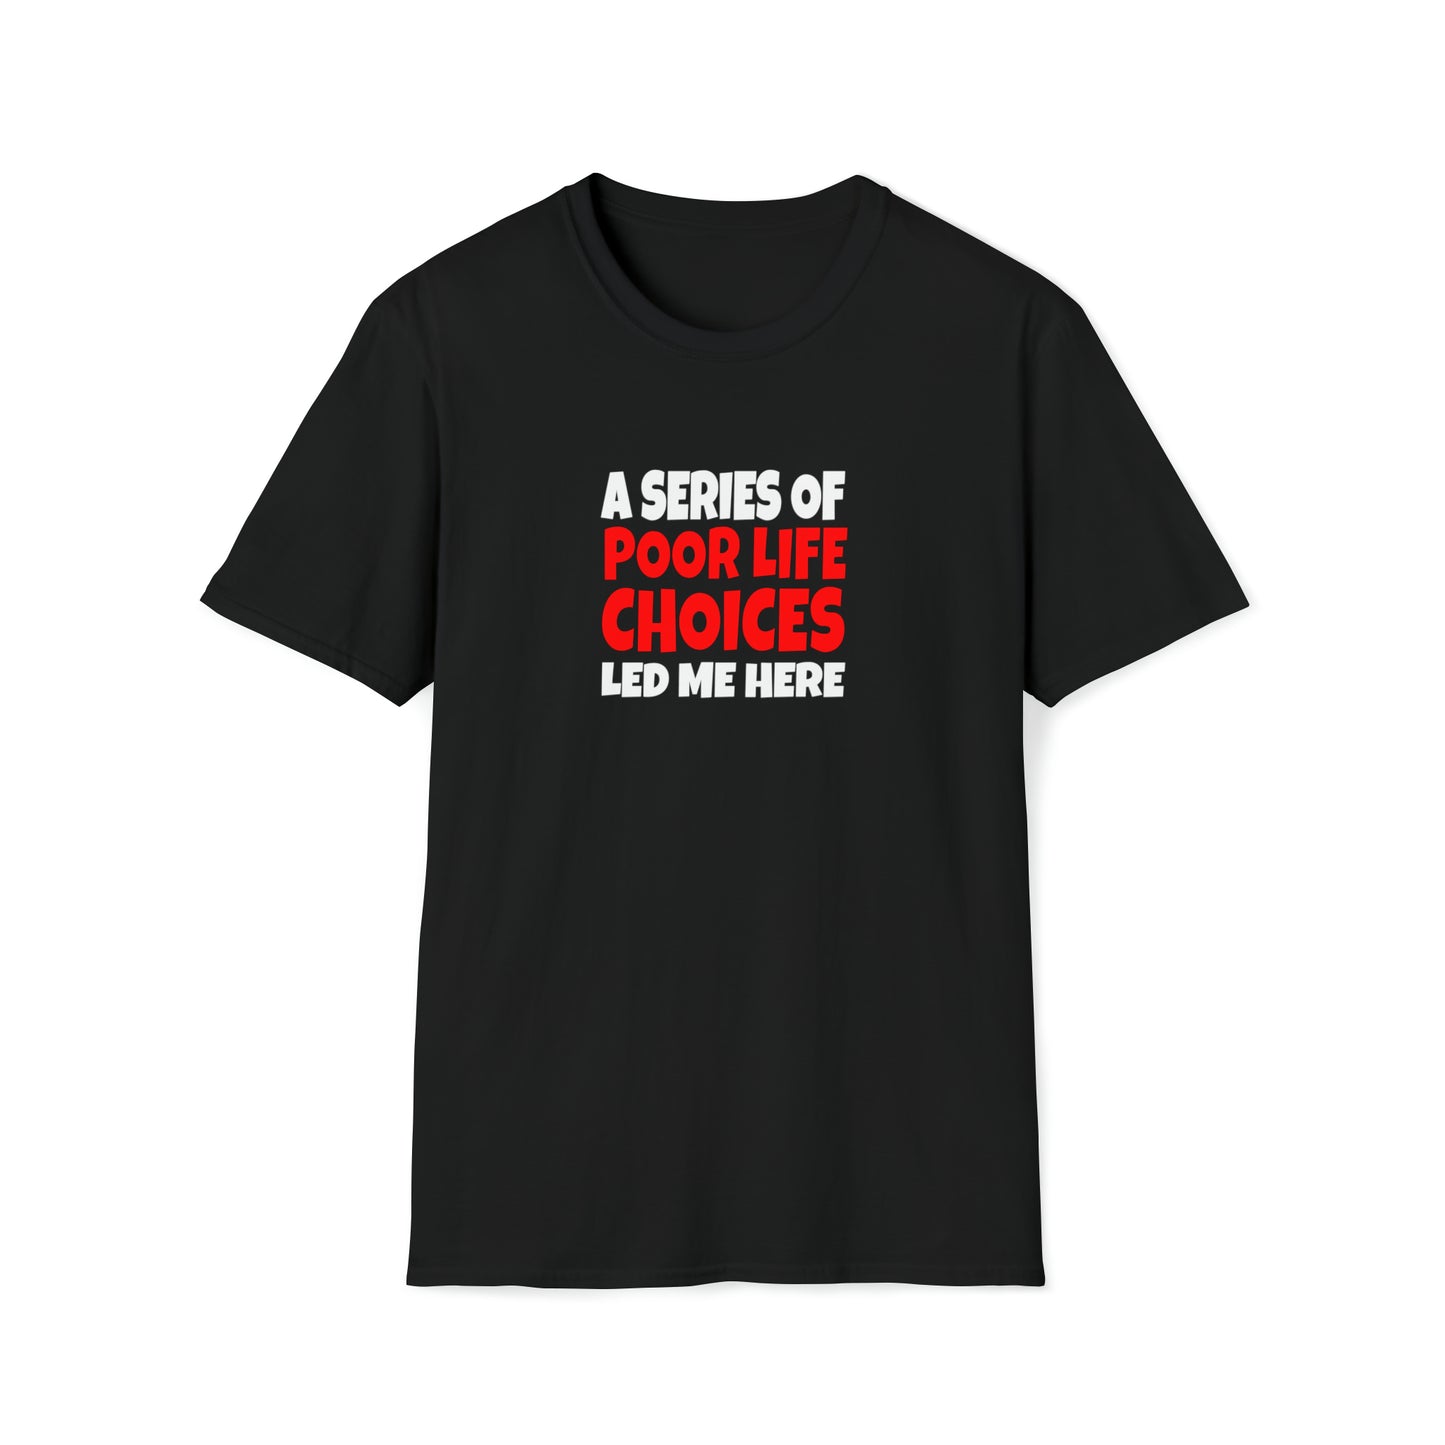 A Series of Poor Choices - T-Shirt